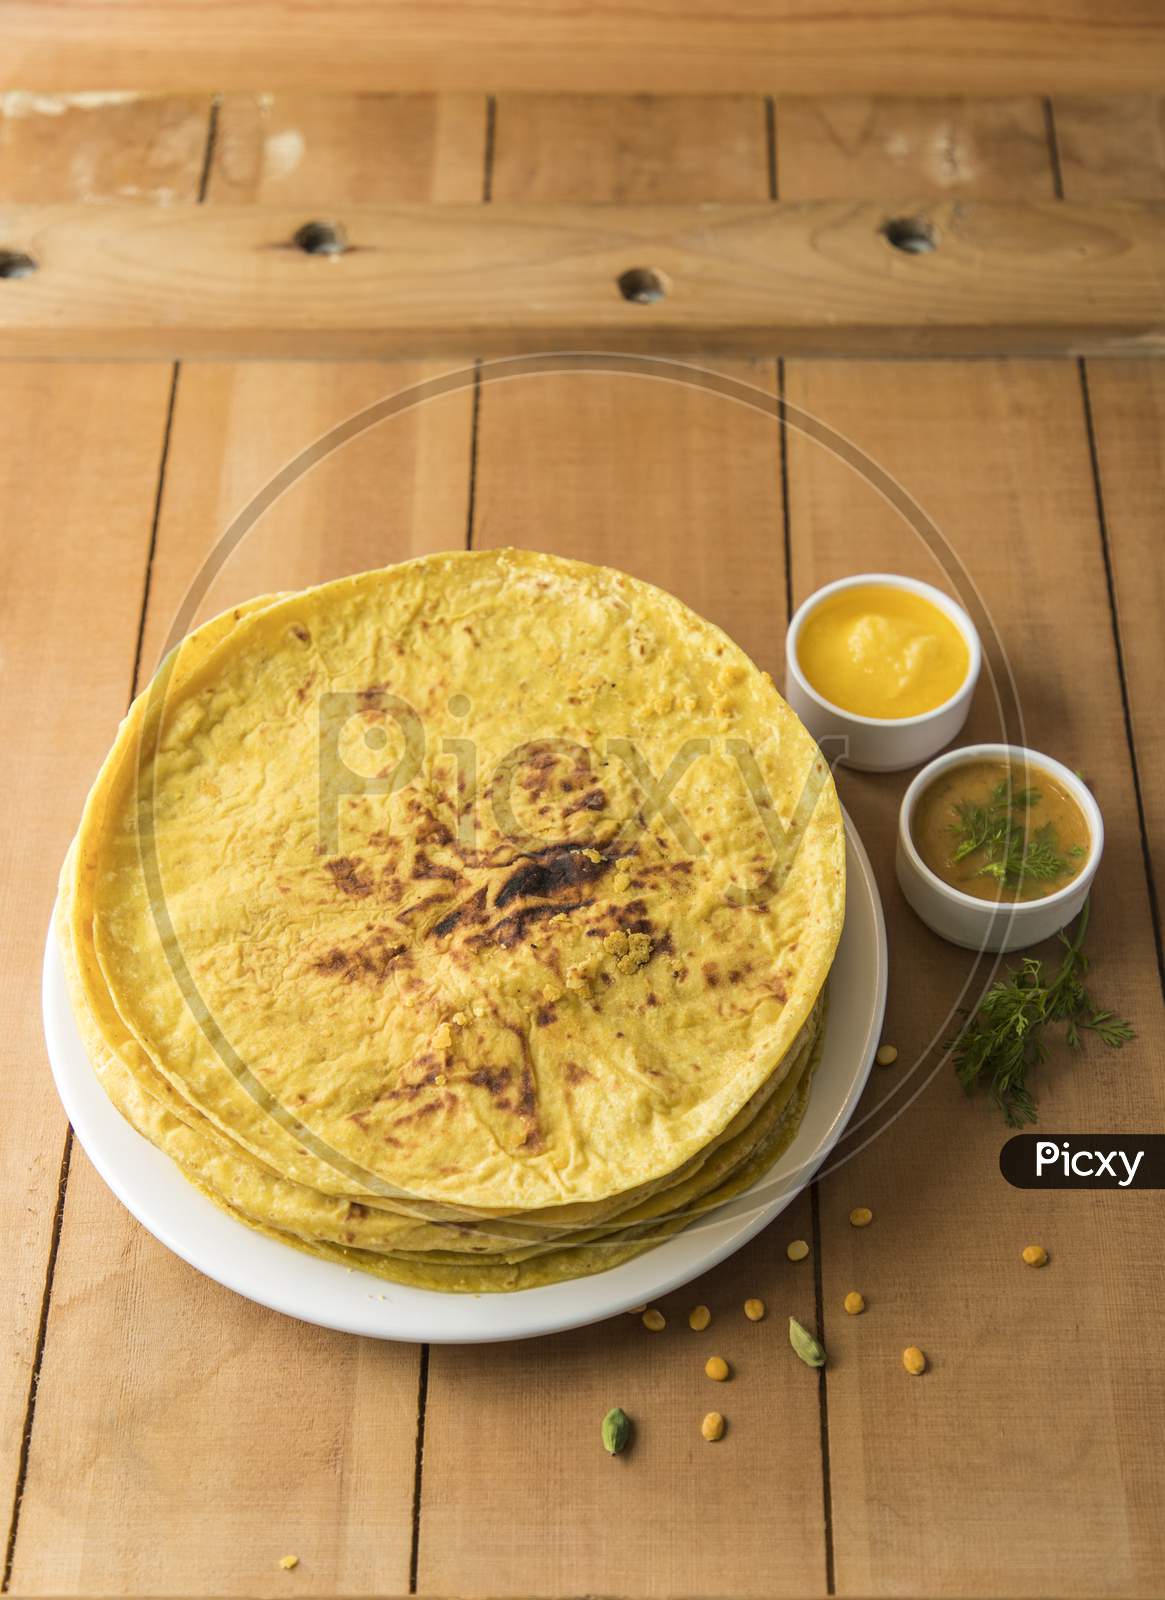 Puranpoli  A Maharashtra Dish For The Holi Festival Occasion On an Wooden Background